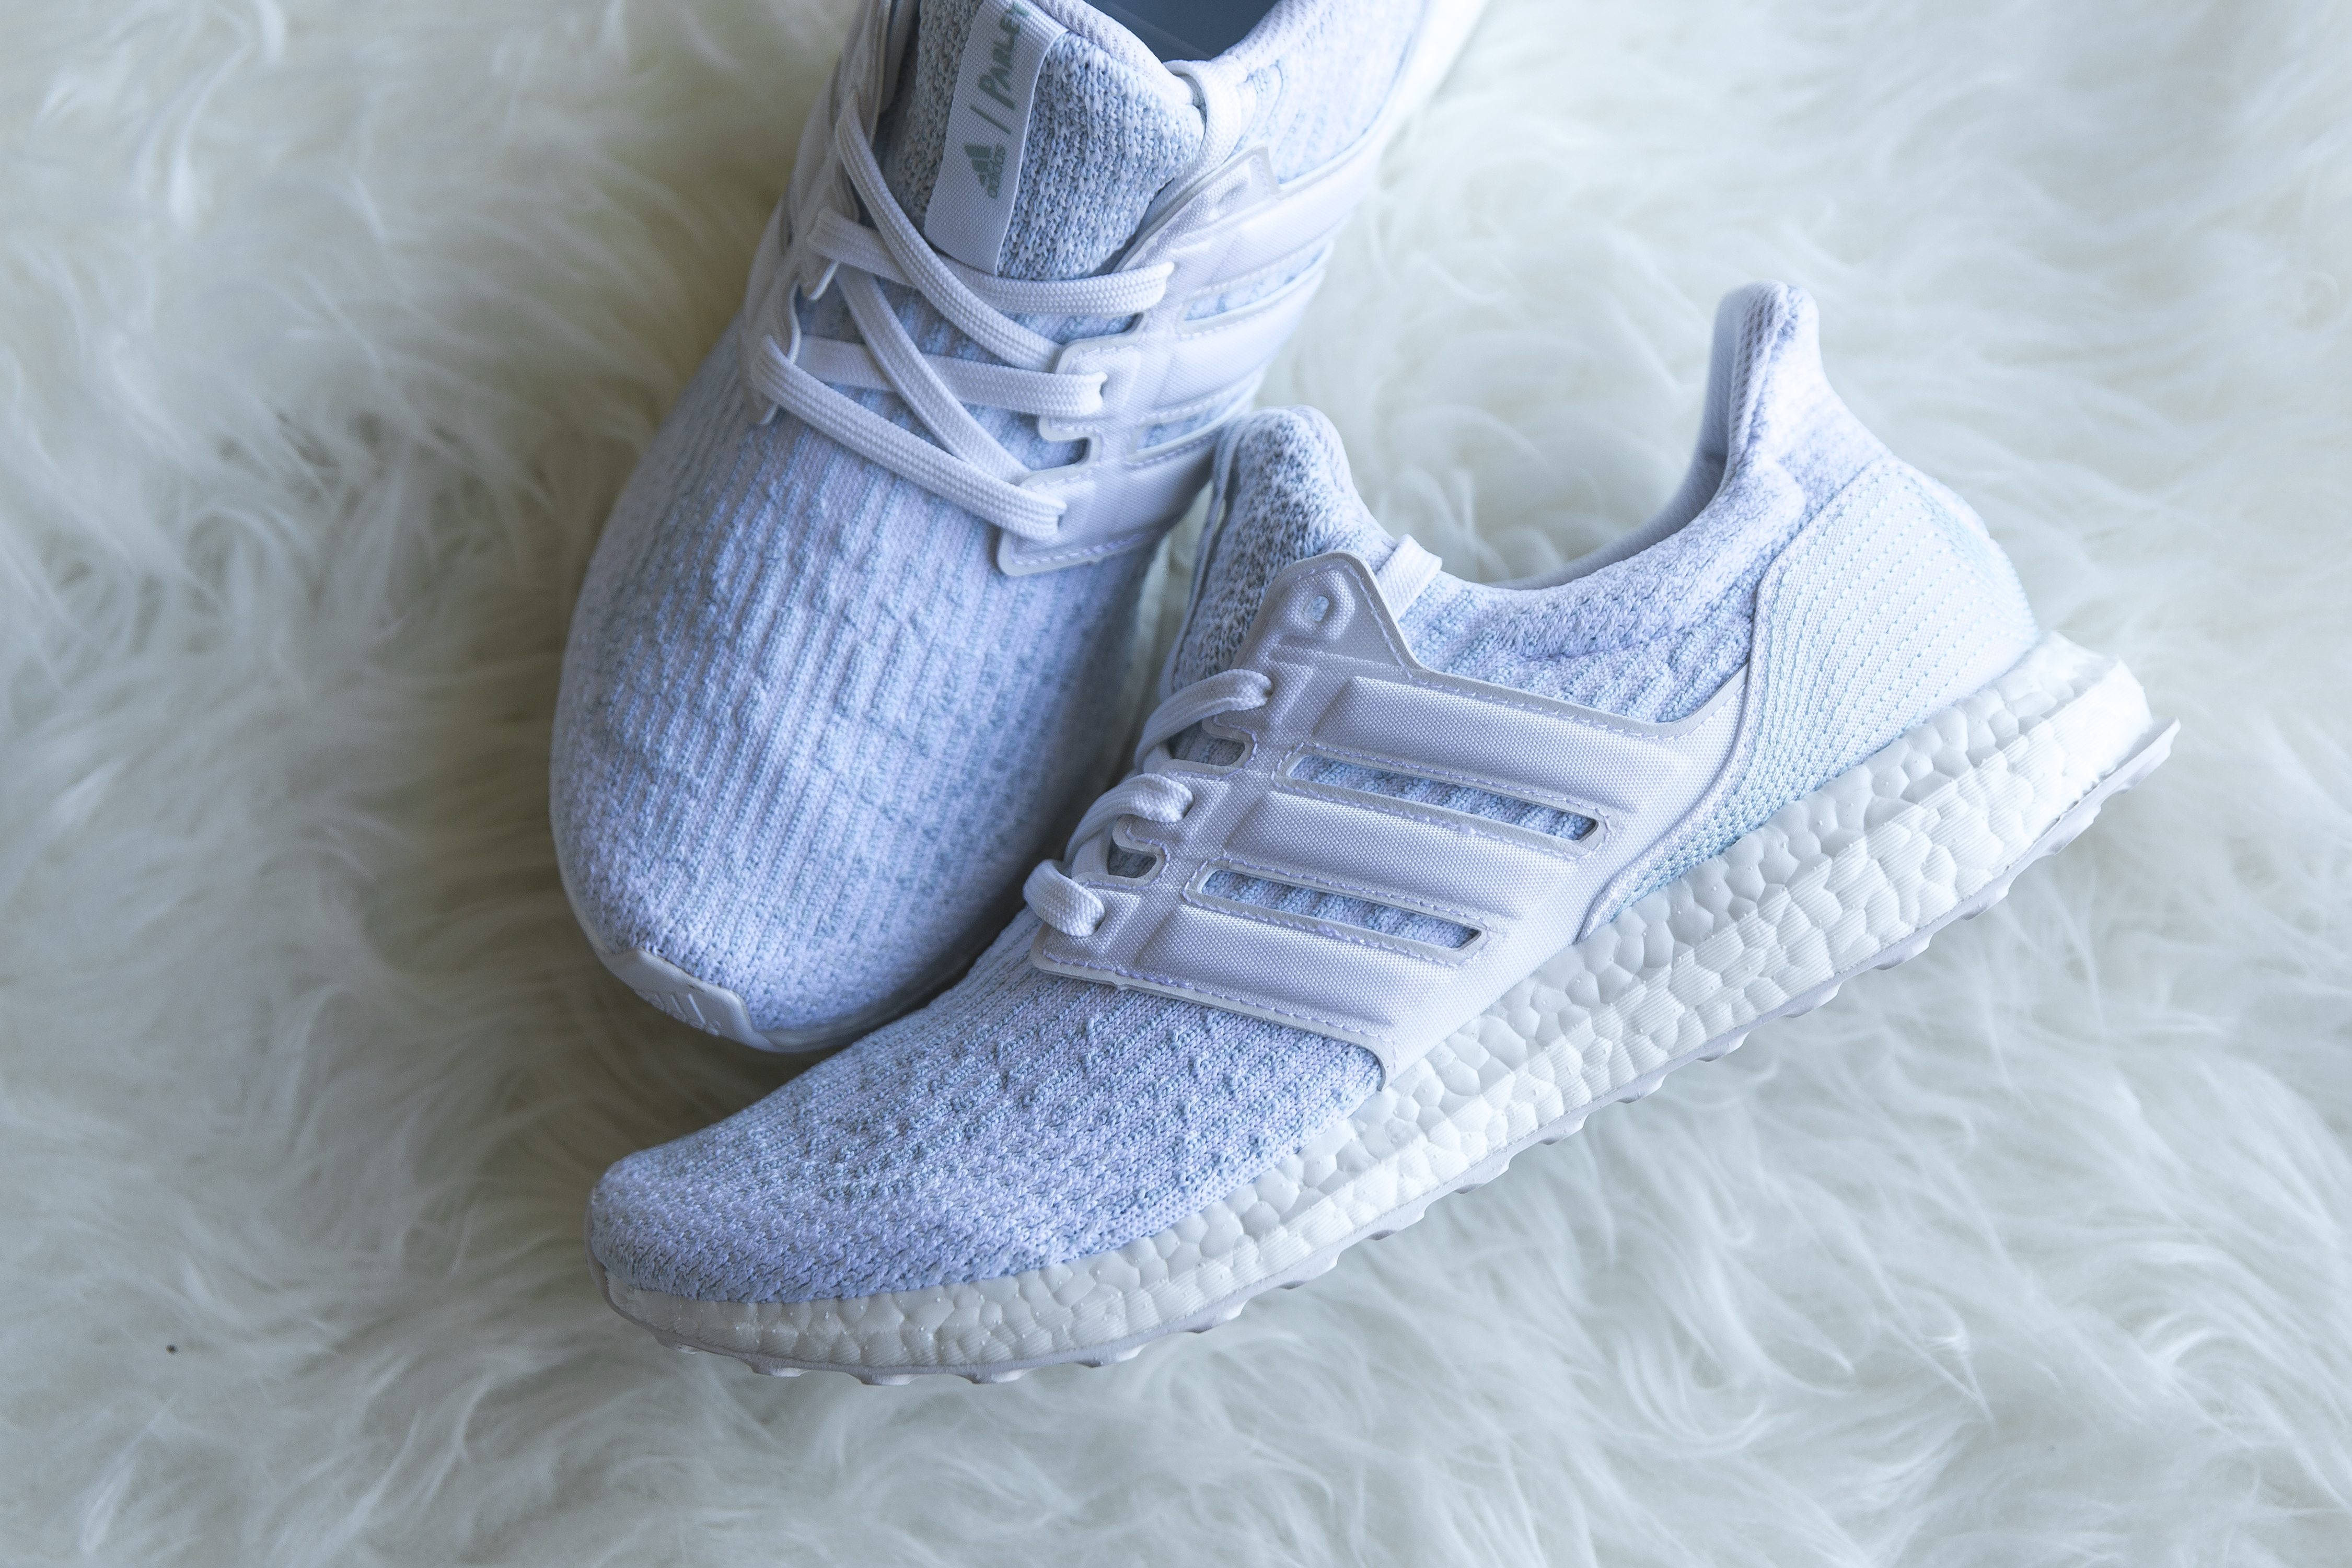 Parley x adidas Ultra Boost Collection